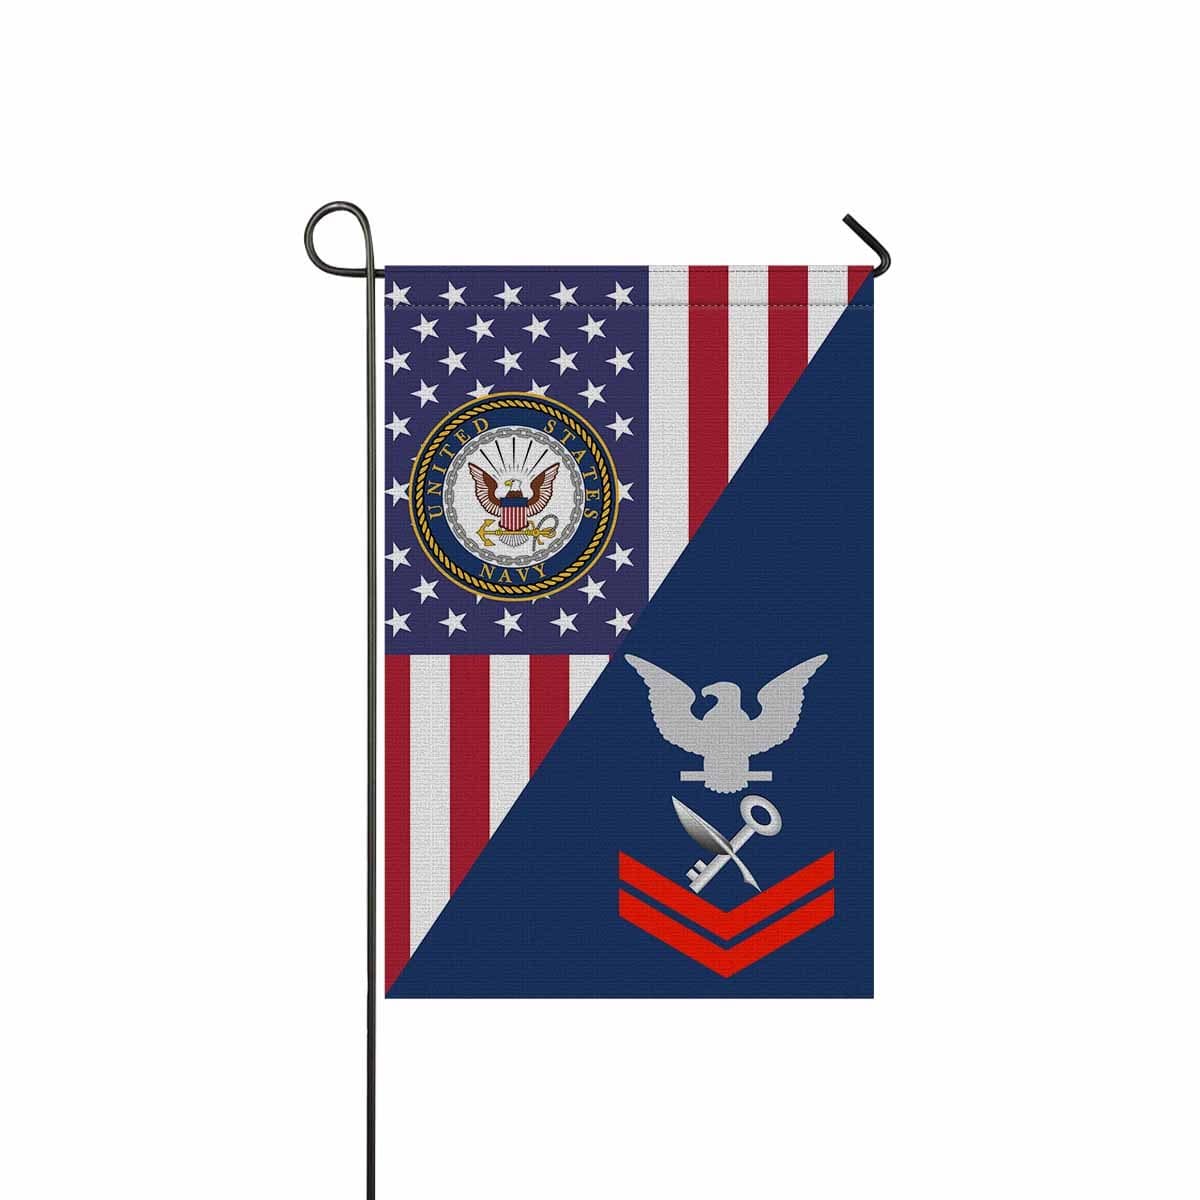 Navy Ship's Serviceman Navy SH E-5 Red Stripe Garden Flag/Yard Flag 12 inches x 18 inches Twin-Side Printing-GDFlag-Navy-Rating-Veterans Nation